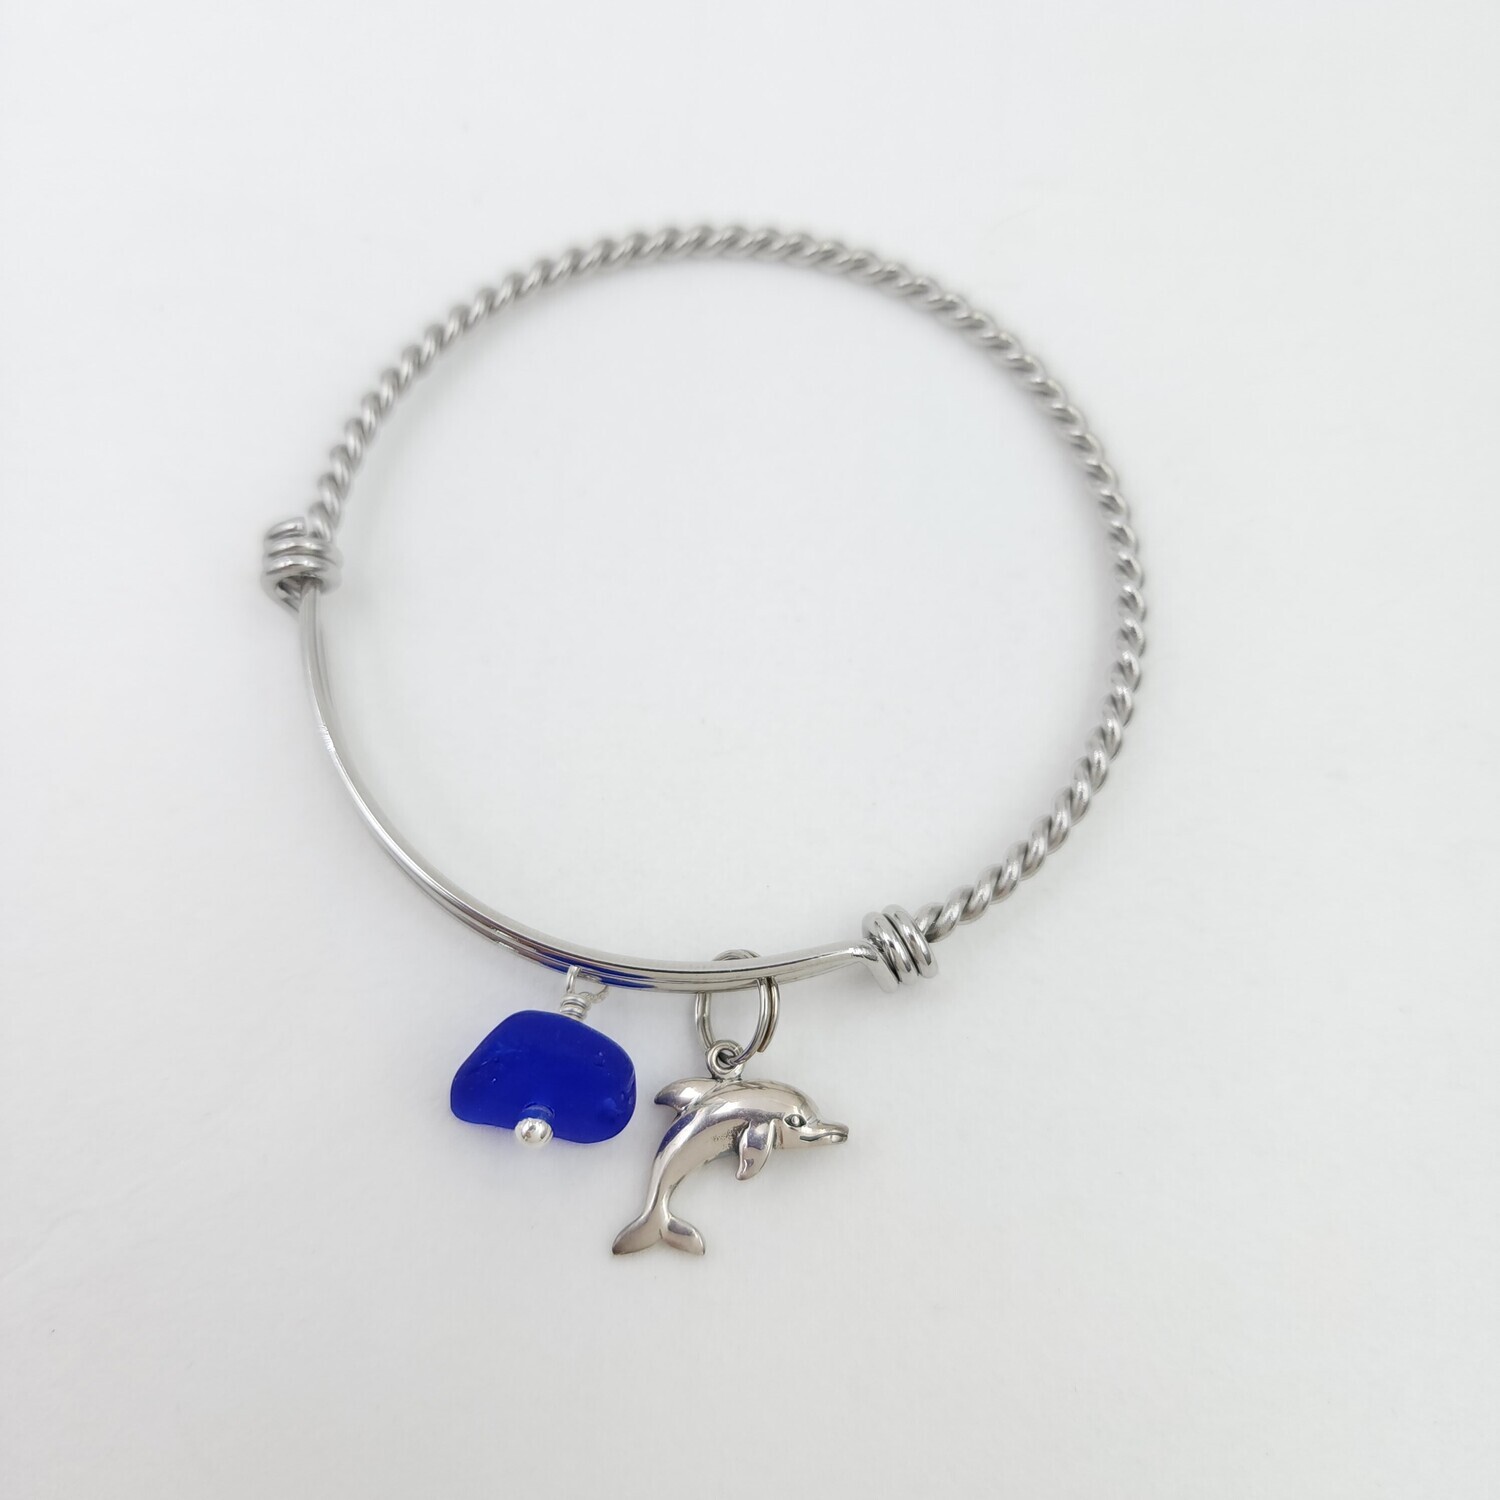 Bangle Bracelet with Dolphin Charm and Blue Lake Erie Beach Glass